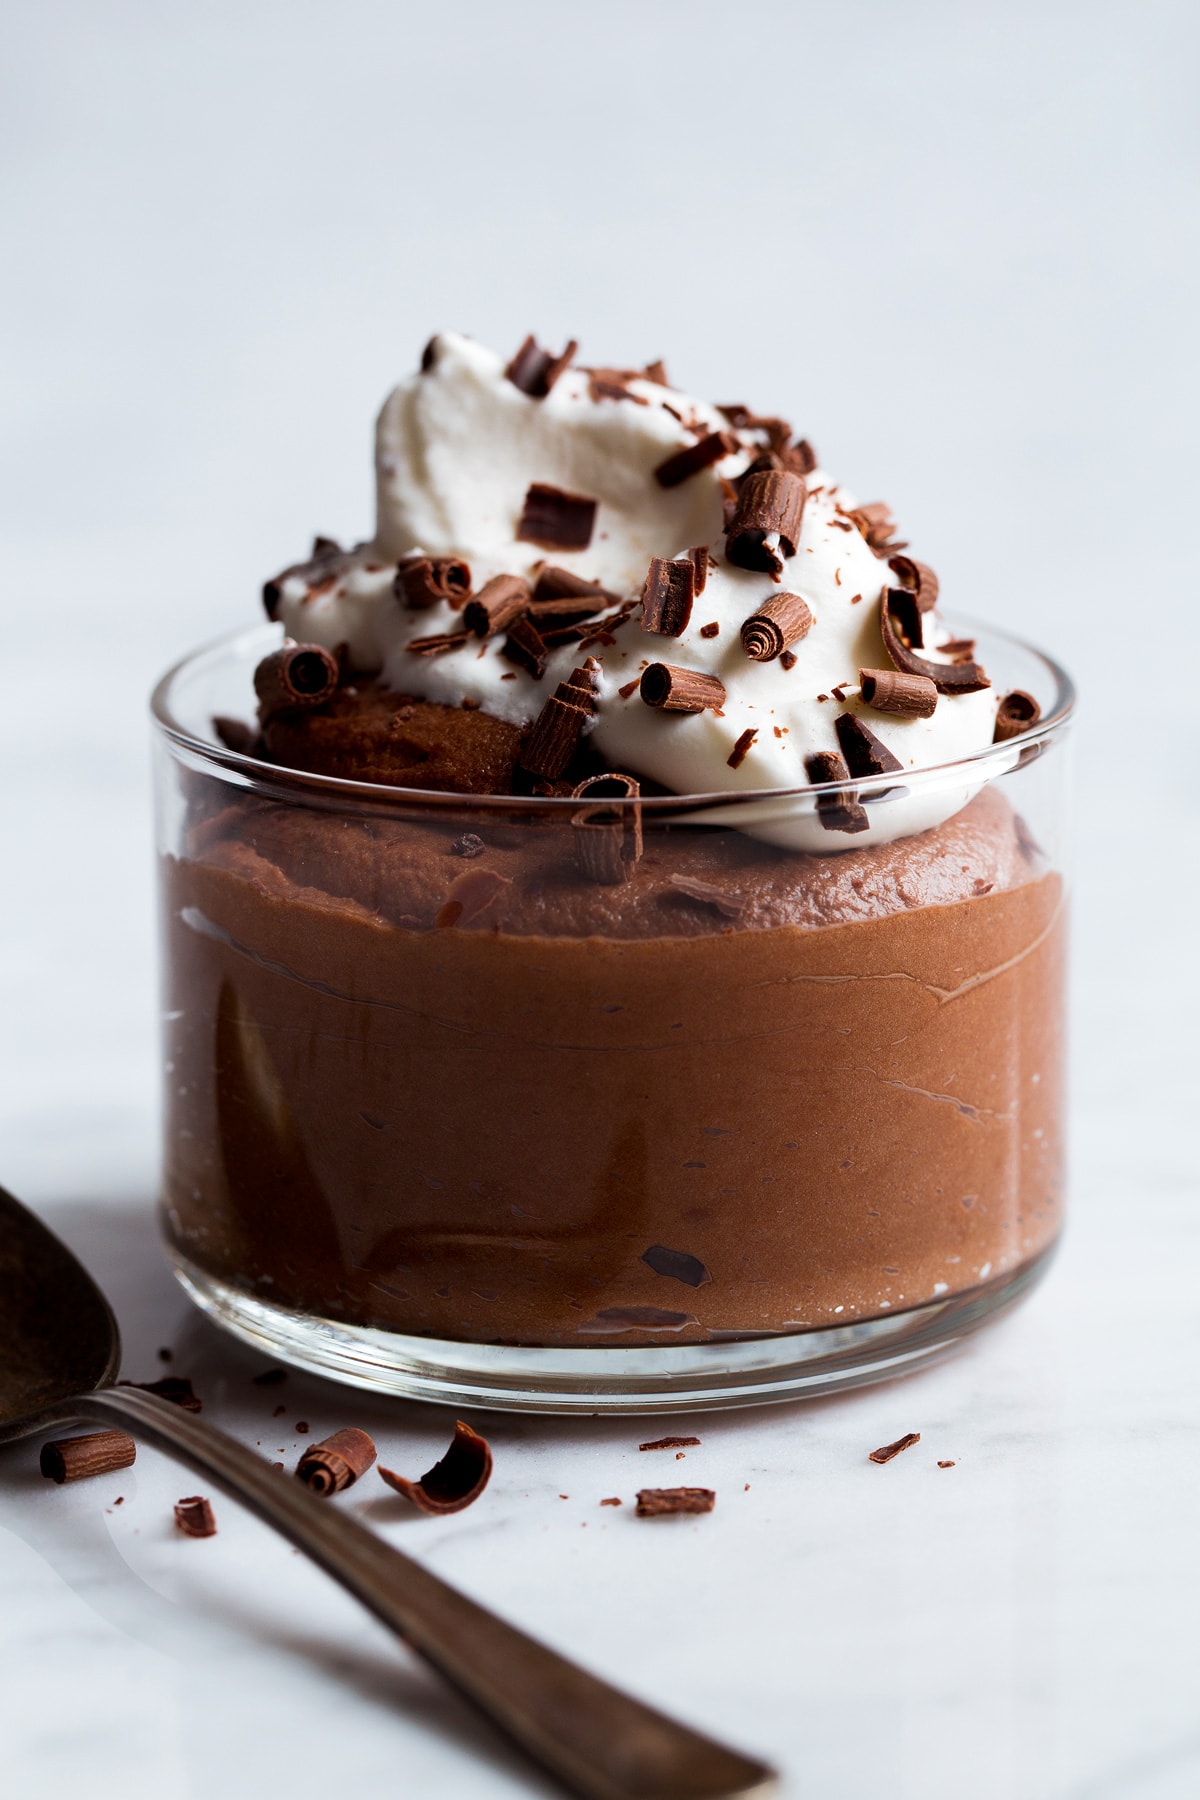 Glass full of chocolate mousse topped with whipped cream and chocolate shavings.